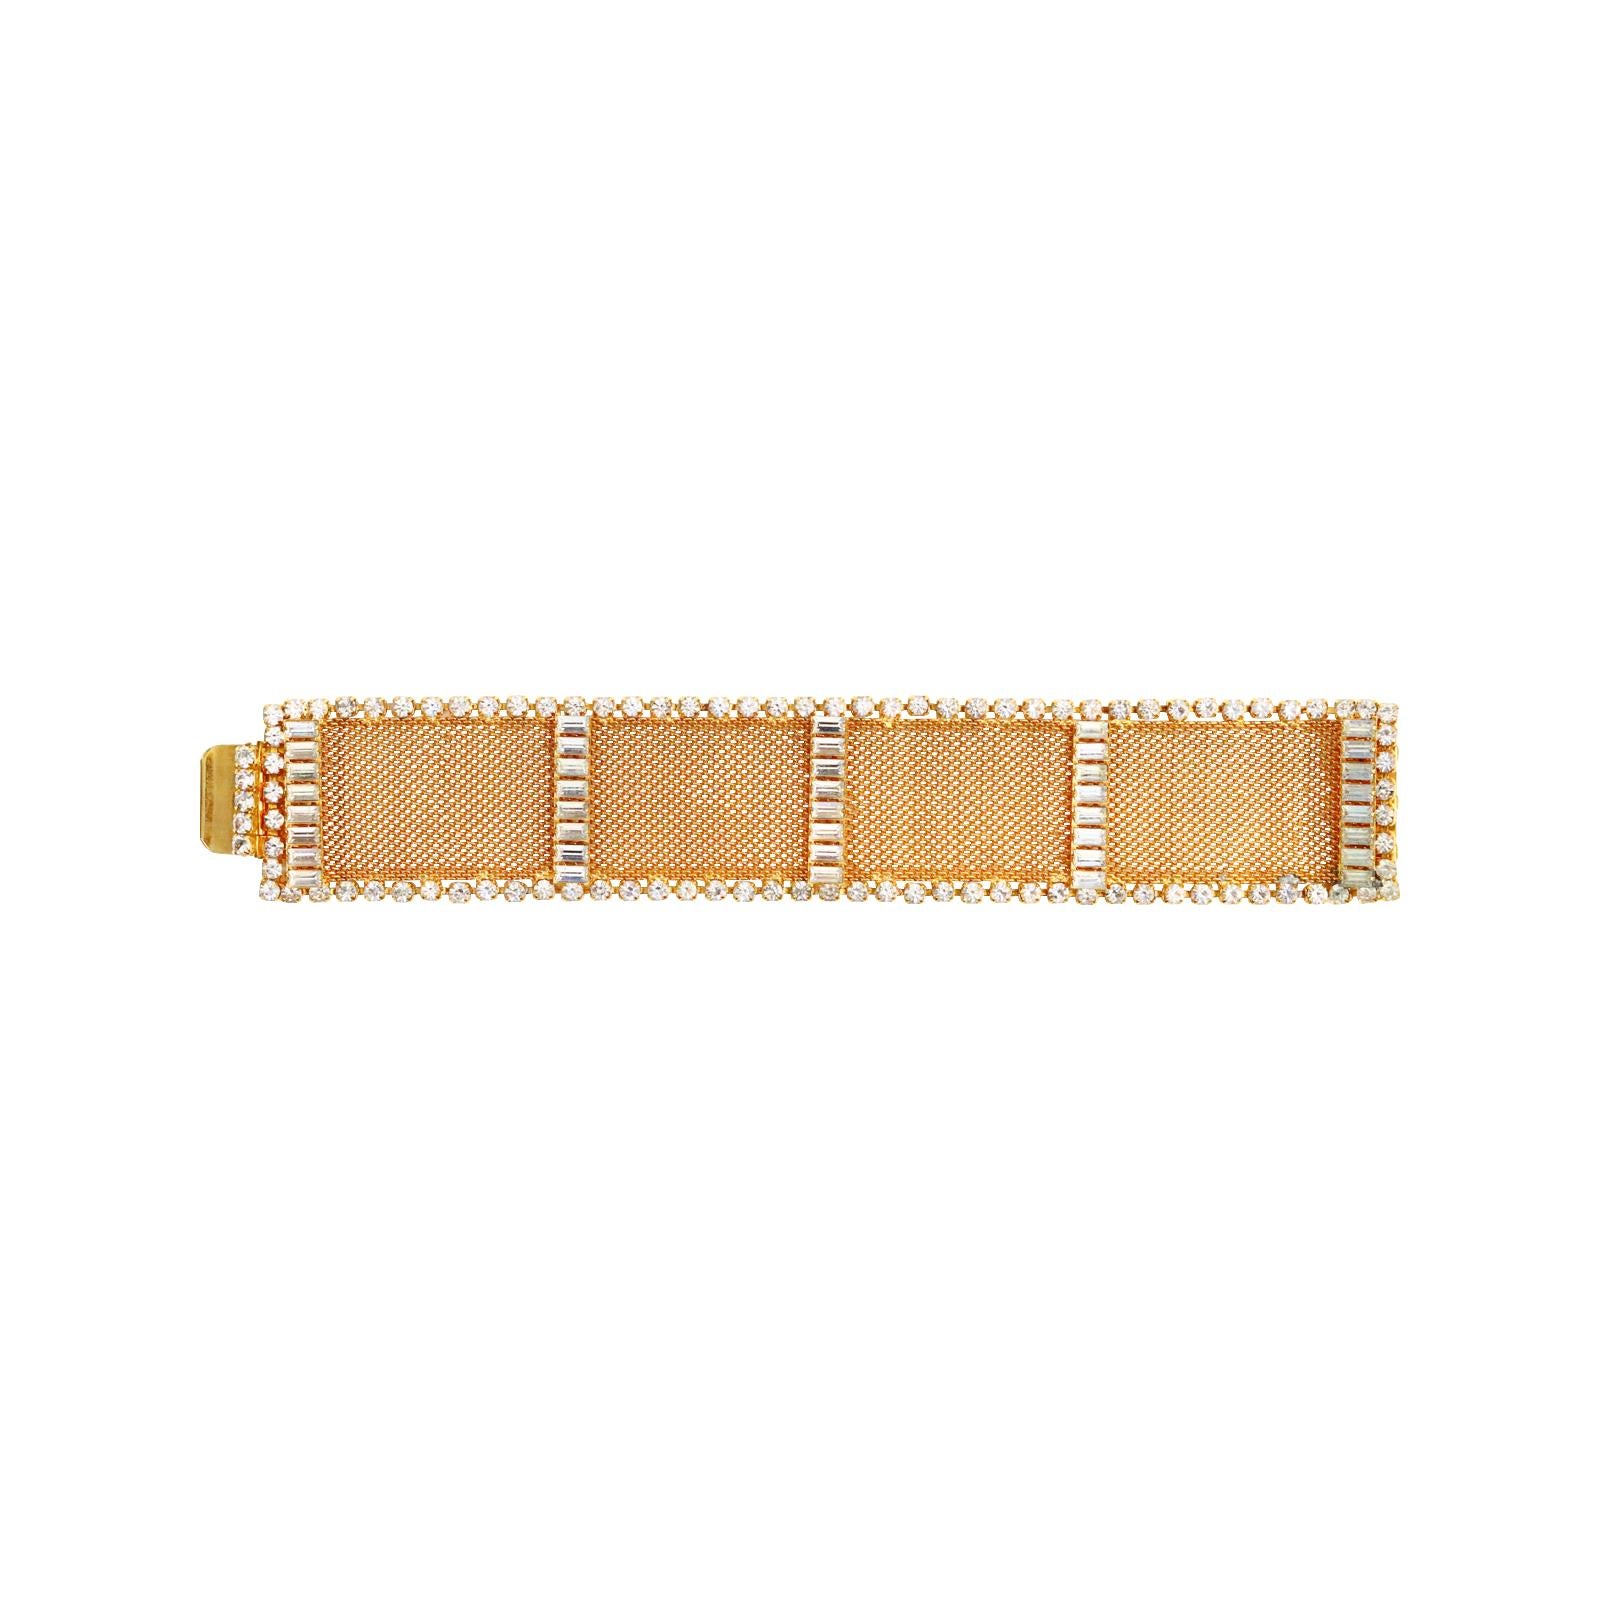 Vintage DeLillo Gold Mesh with Crystals Bracelet Circa 1970s. Classic DeLillo with baguette and round crystals on mesh.  Very classic bracelet.